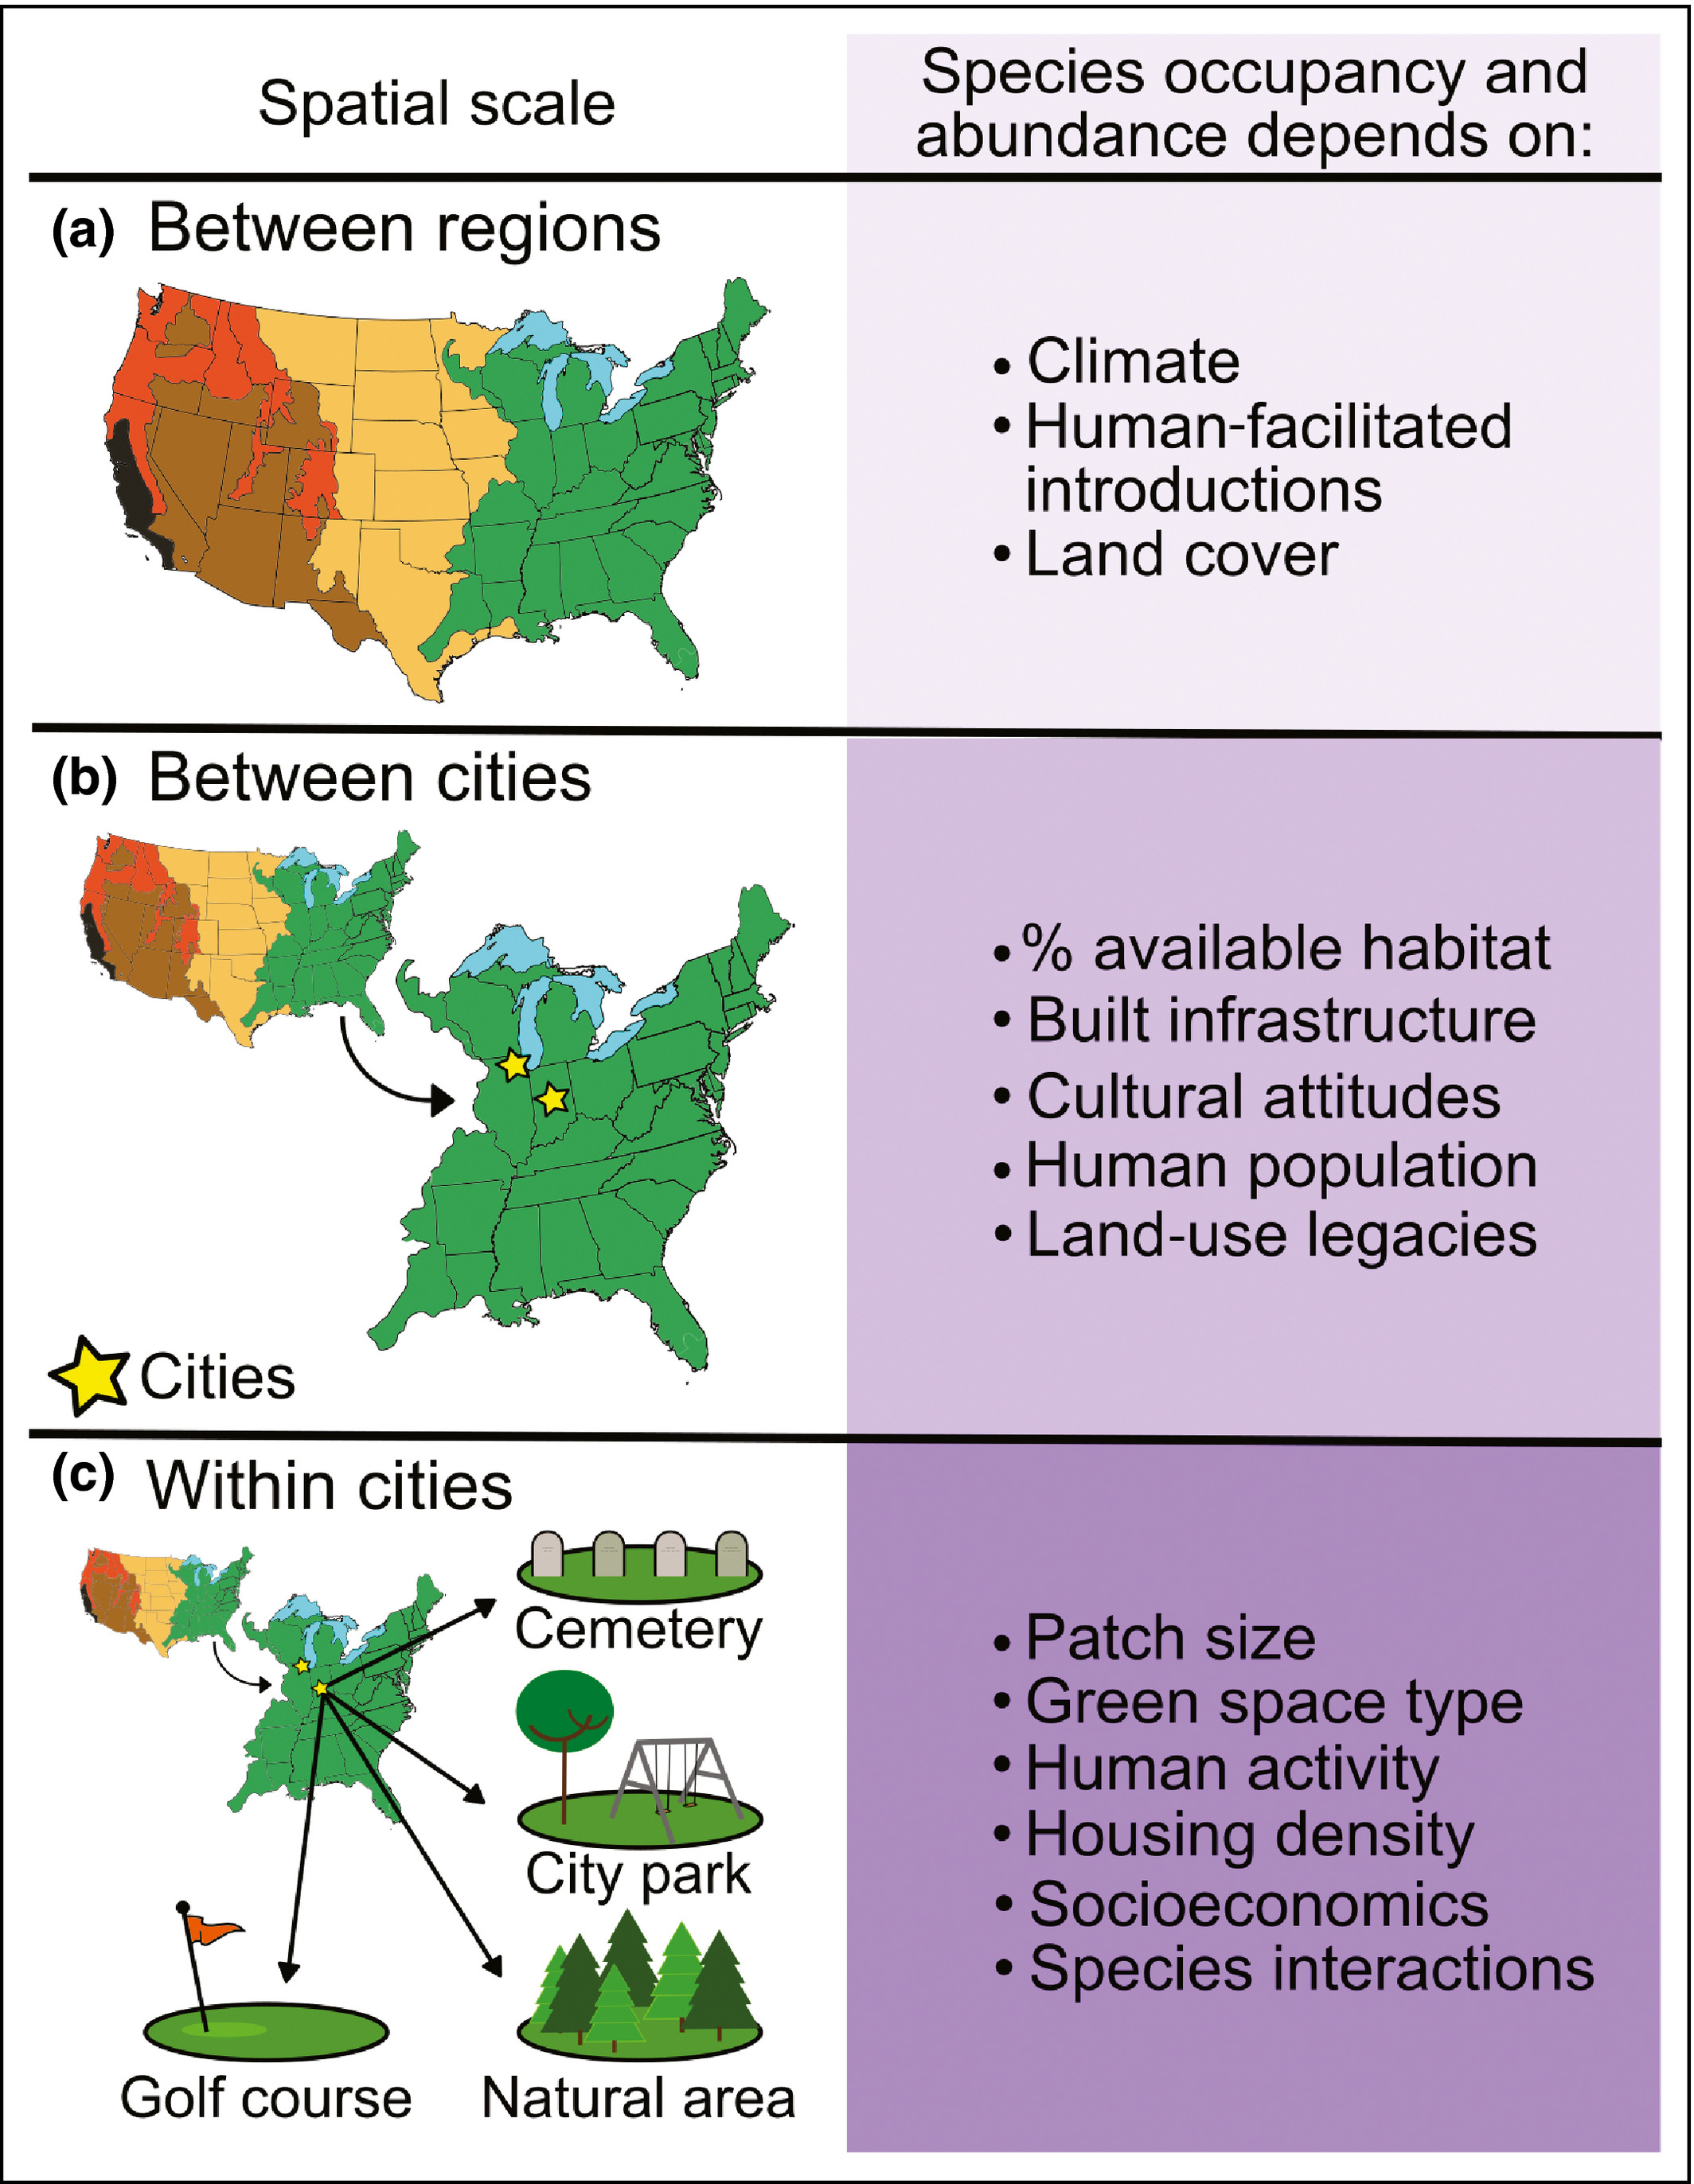 The composition of urban wildlife communities are determined by factors at varying hierarchical scales (Magle et al. 2019).